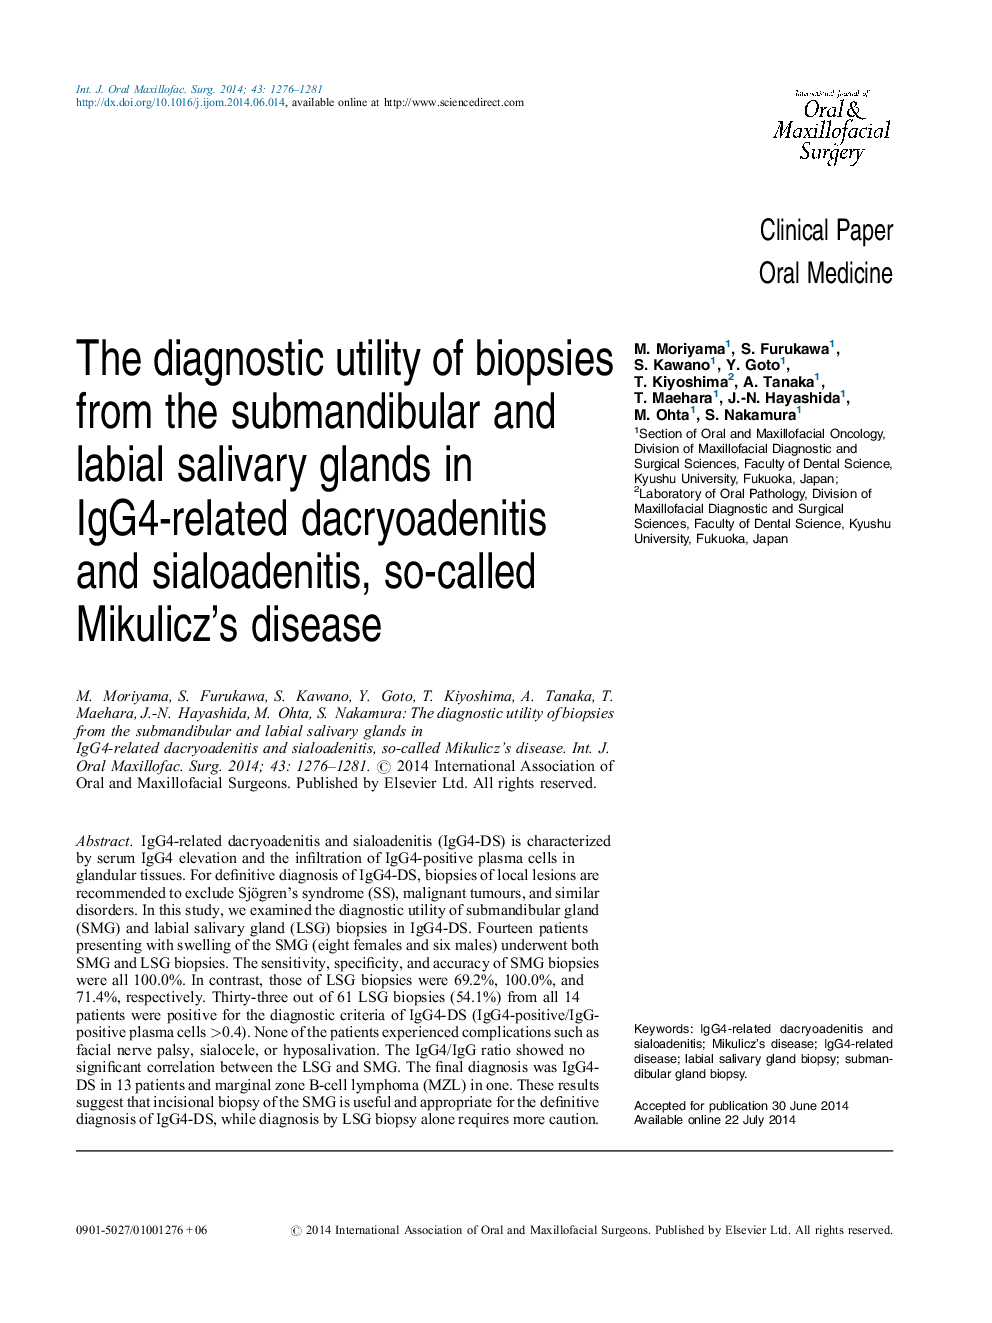 The diagnostic utility of biopsies from the submandibular and labial salivary glands in IgG4-related dacryoadenitis and sialoadenitis, so-called Mikulicz's disease